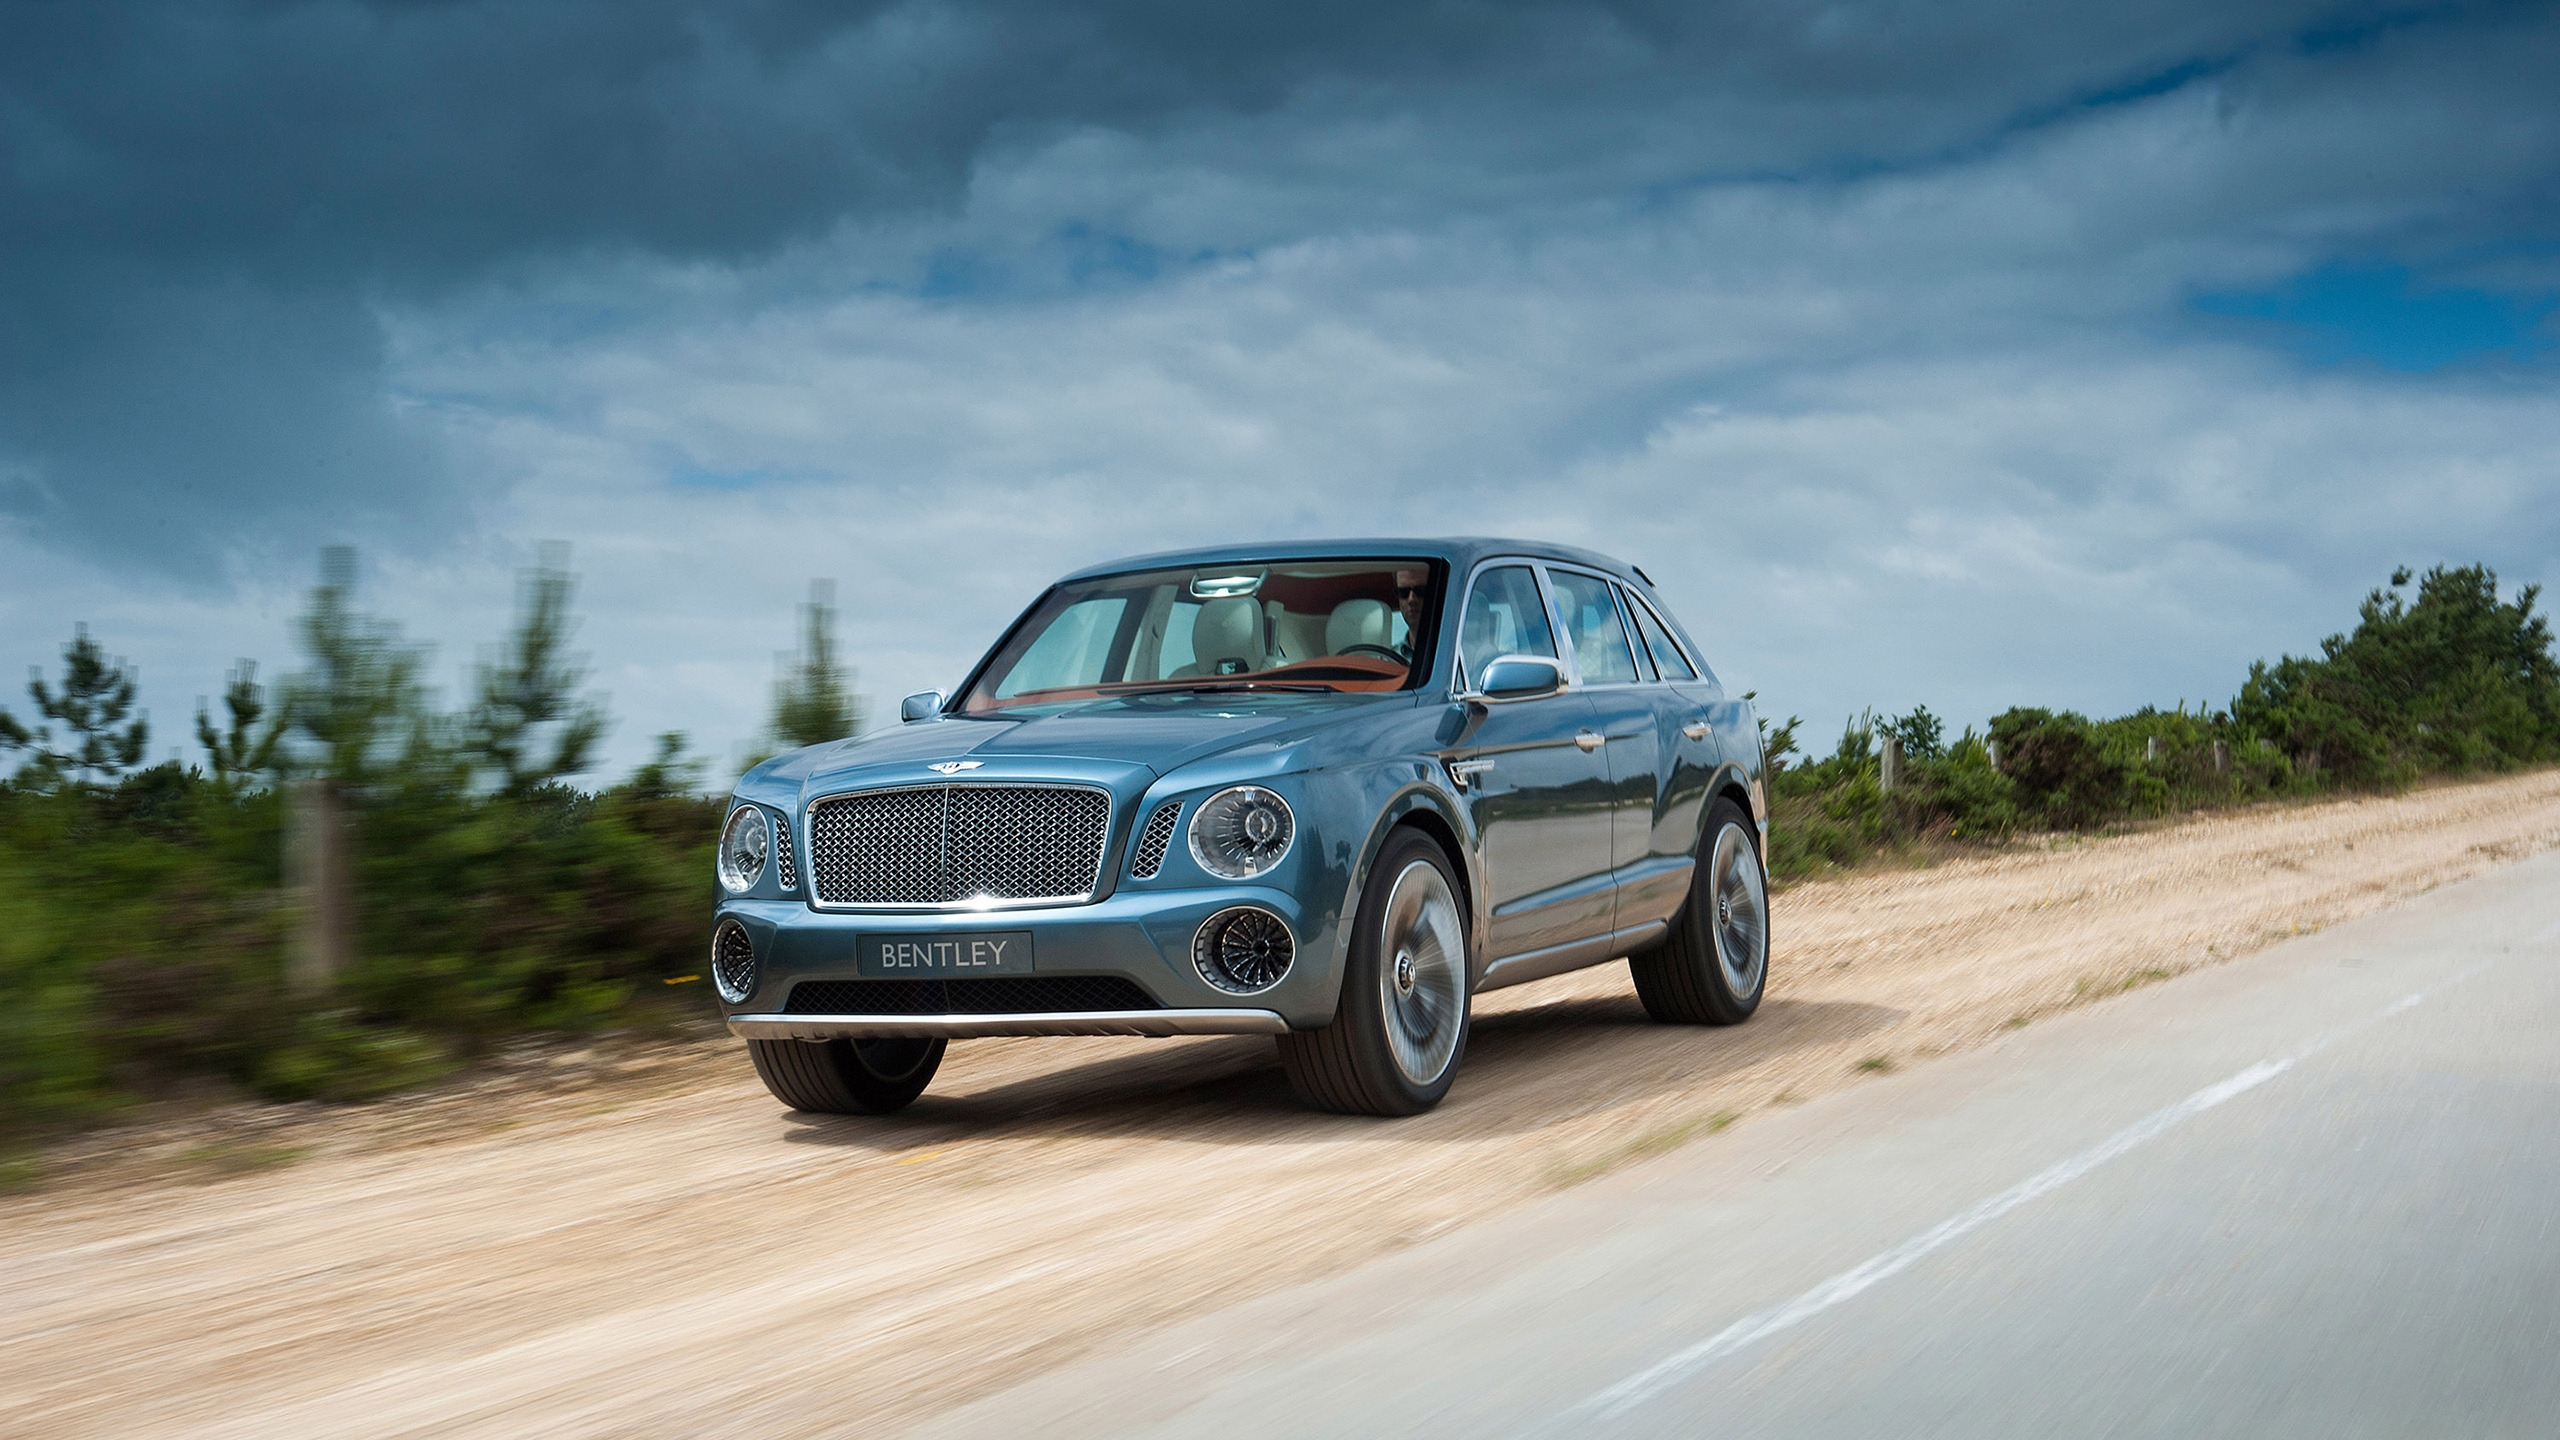 Amazing Bentley SUV Concept for 2560x1440 HDTV resolution